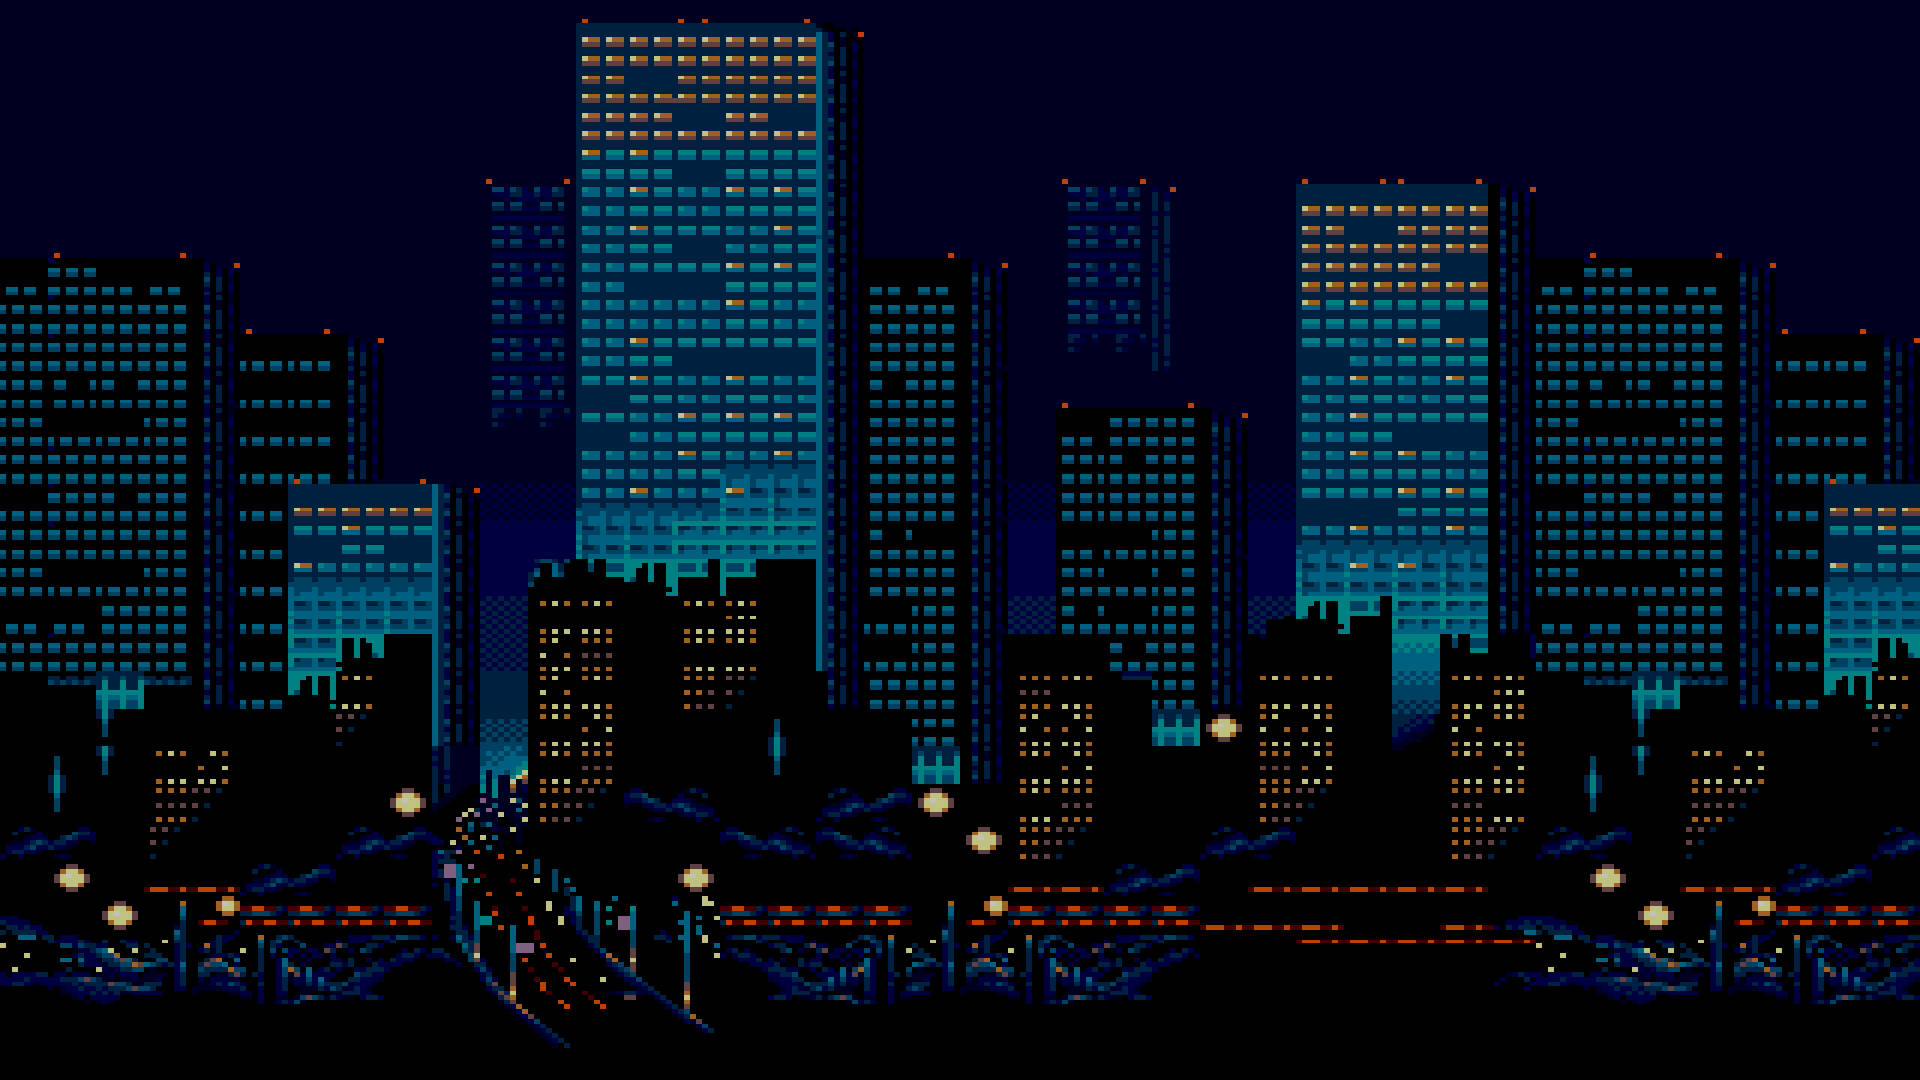 An Aesthetic Pixel Art Image with HD Resolution Wallpaper